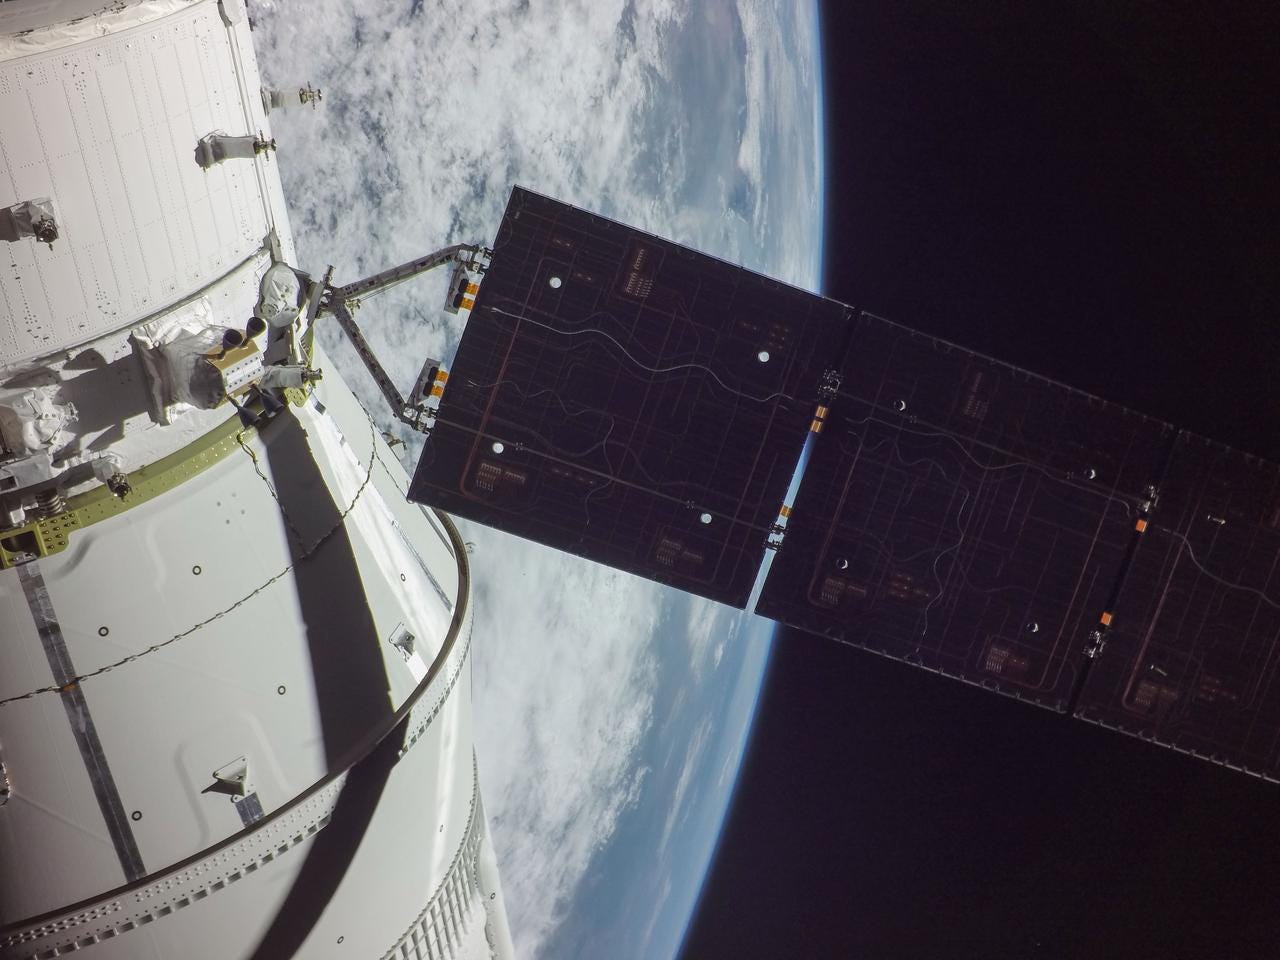 art001e000198 (Nov. 16, 2022) – One of Orion’s four solar arrays is seen during deployment shortly after the uncrewed Artemis I mission launched at 1:47 a.m. EST on Nov. 16, 2022.